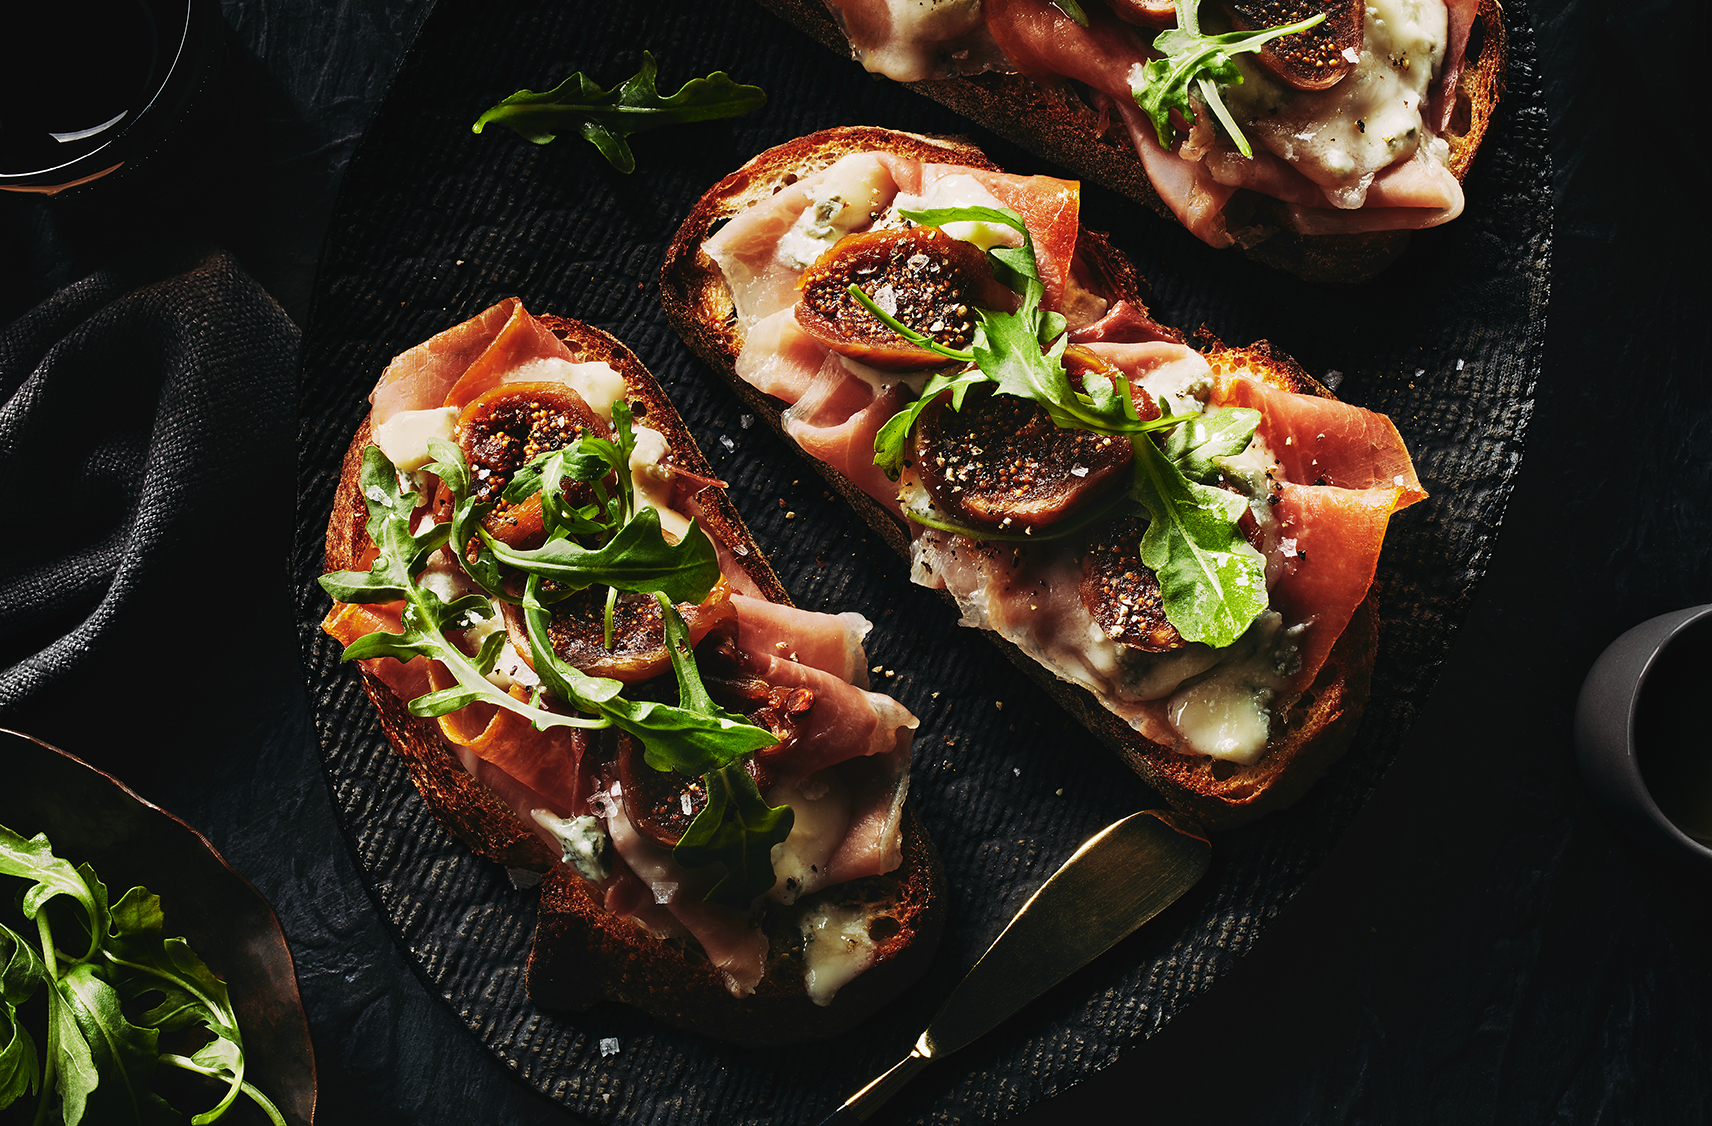 two slices of gorgonzola and prosciutto tartines placed on a black decorative plate.  Tartines are topped with some arugula

